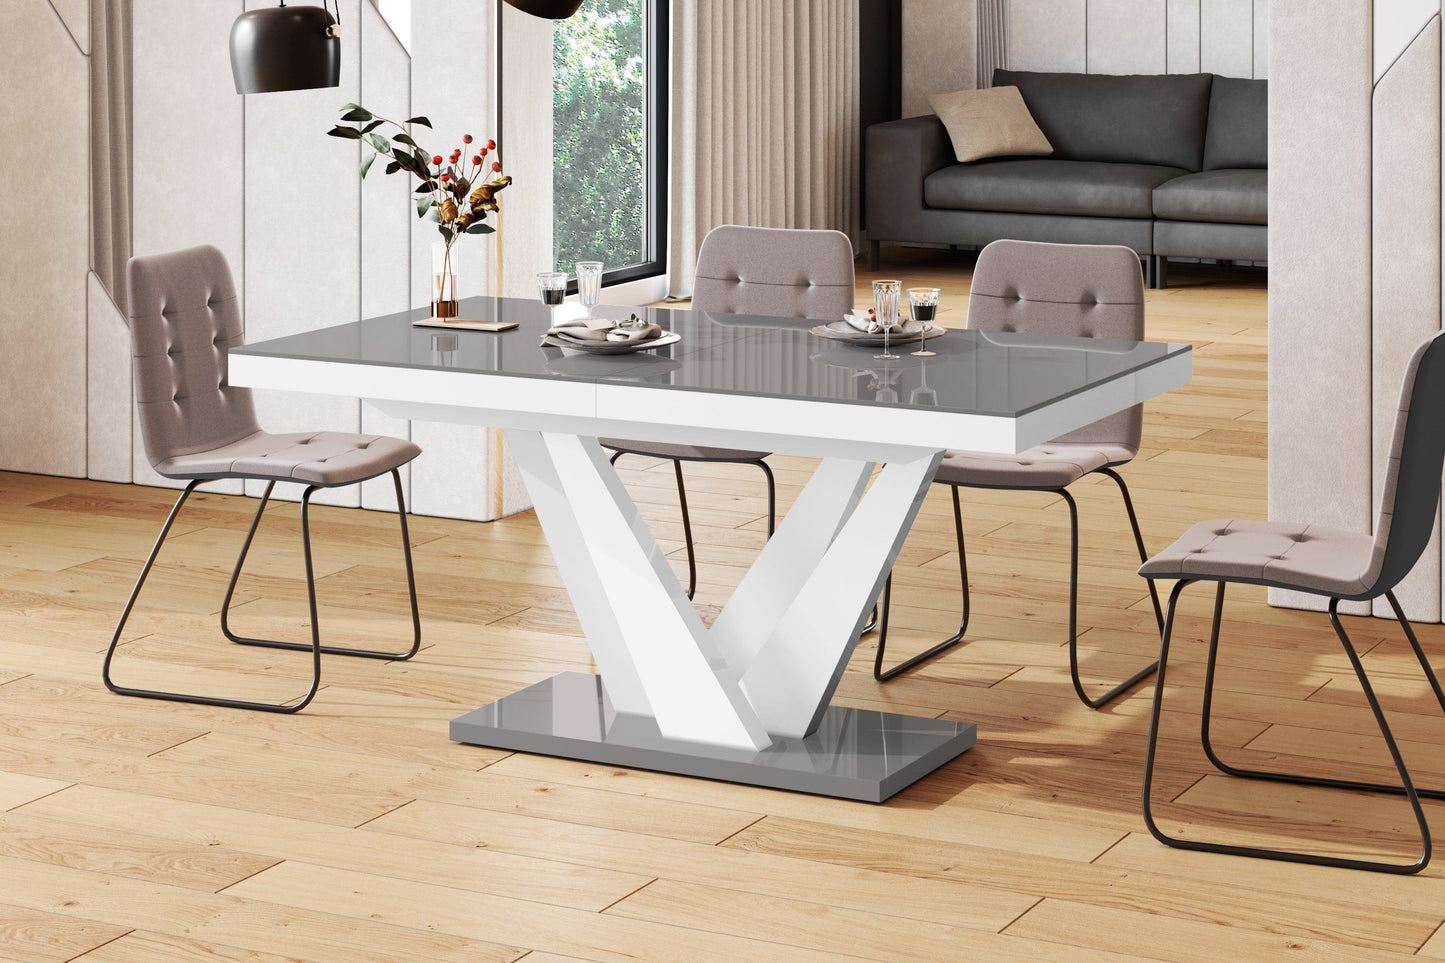 Dining Set CHARA 7 pcs. gray/white modern glossy Dining Table with 2 self-starting leaves plus 6 chairs